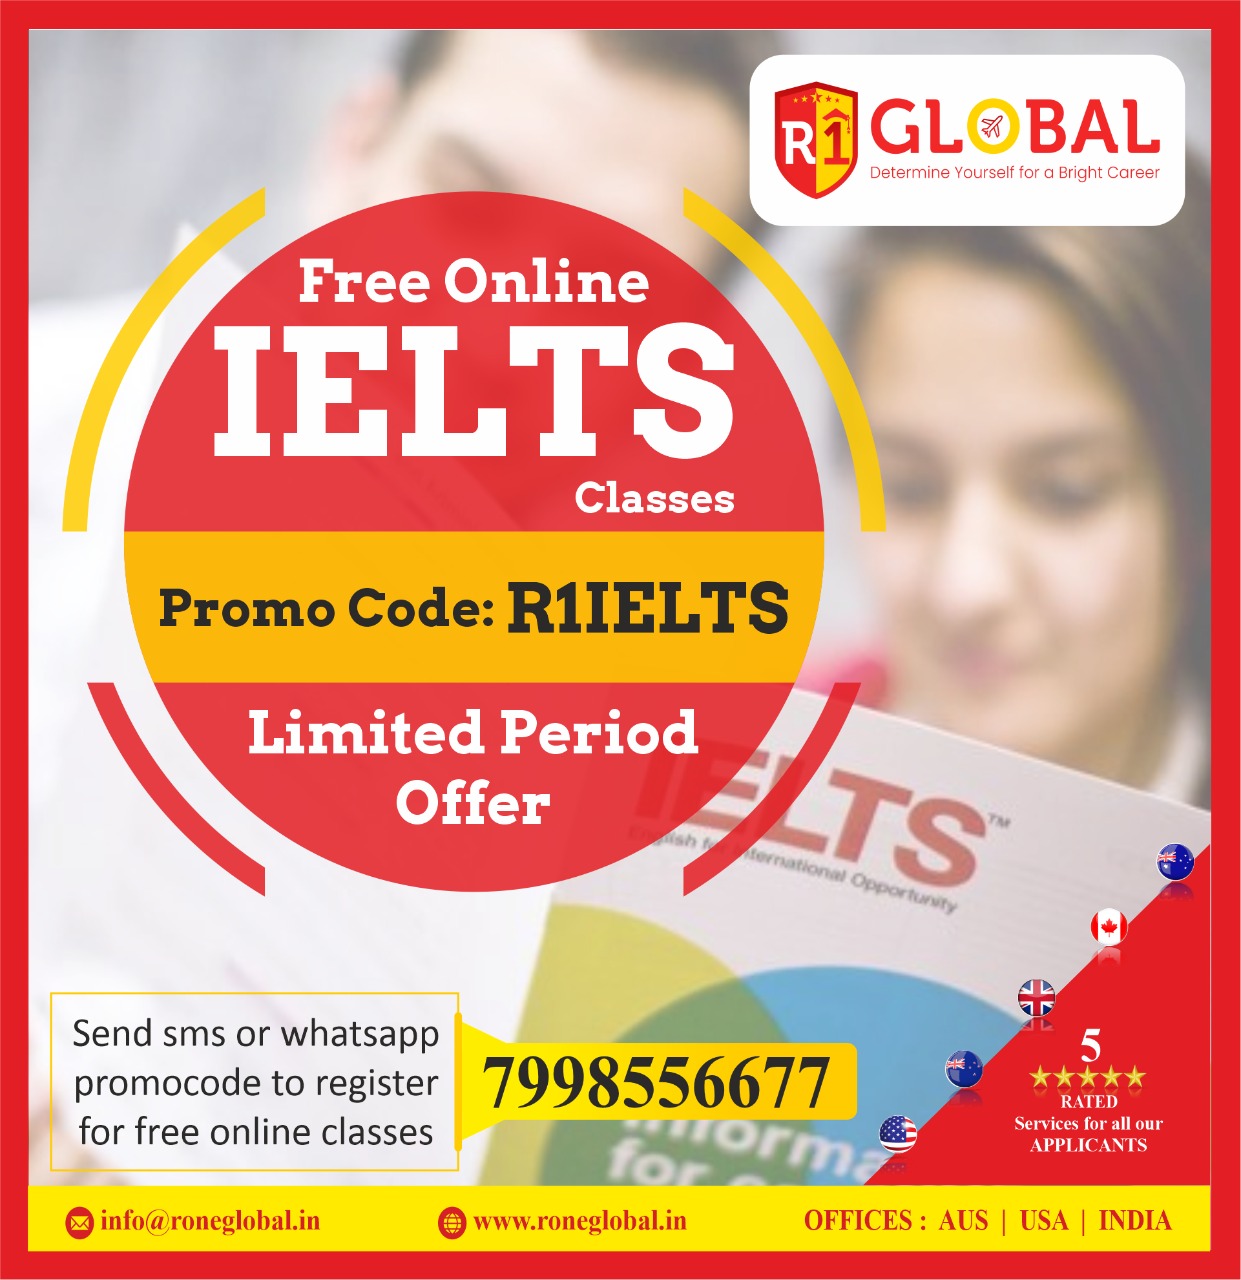 Free Online IELTS Classes, Limited Period Offer with Promo Code R1IELTS